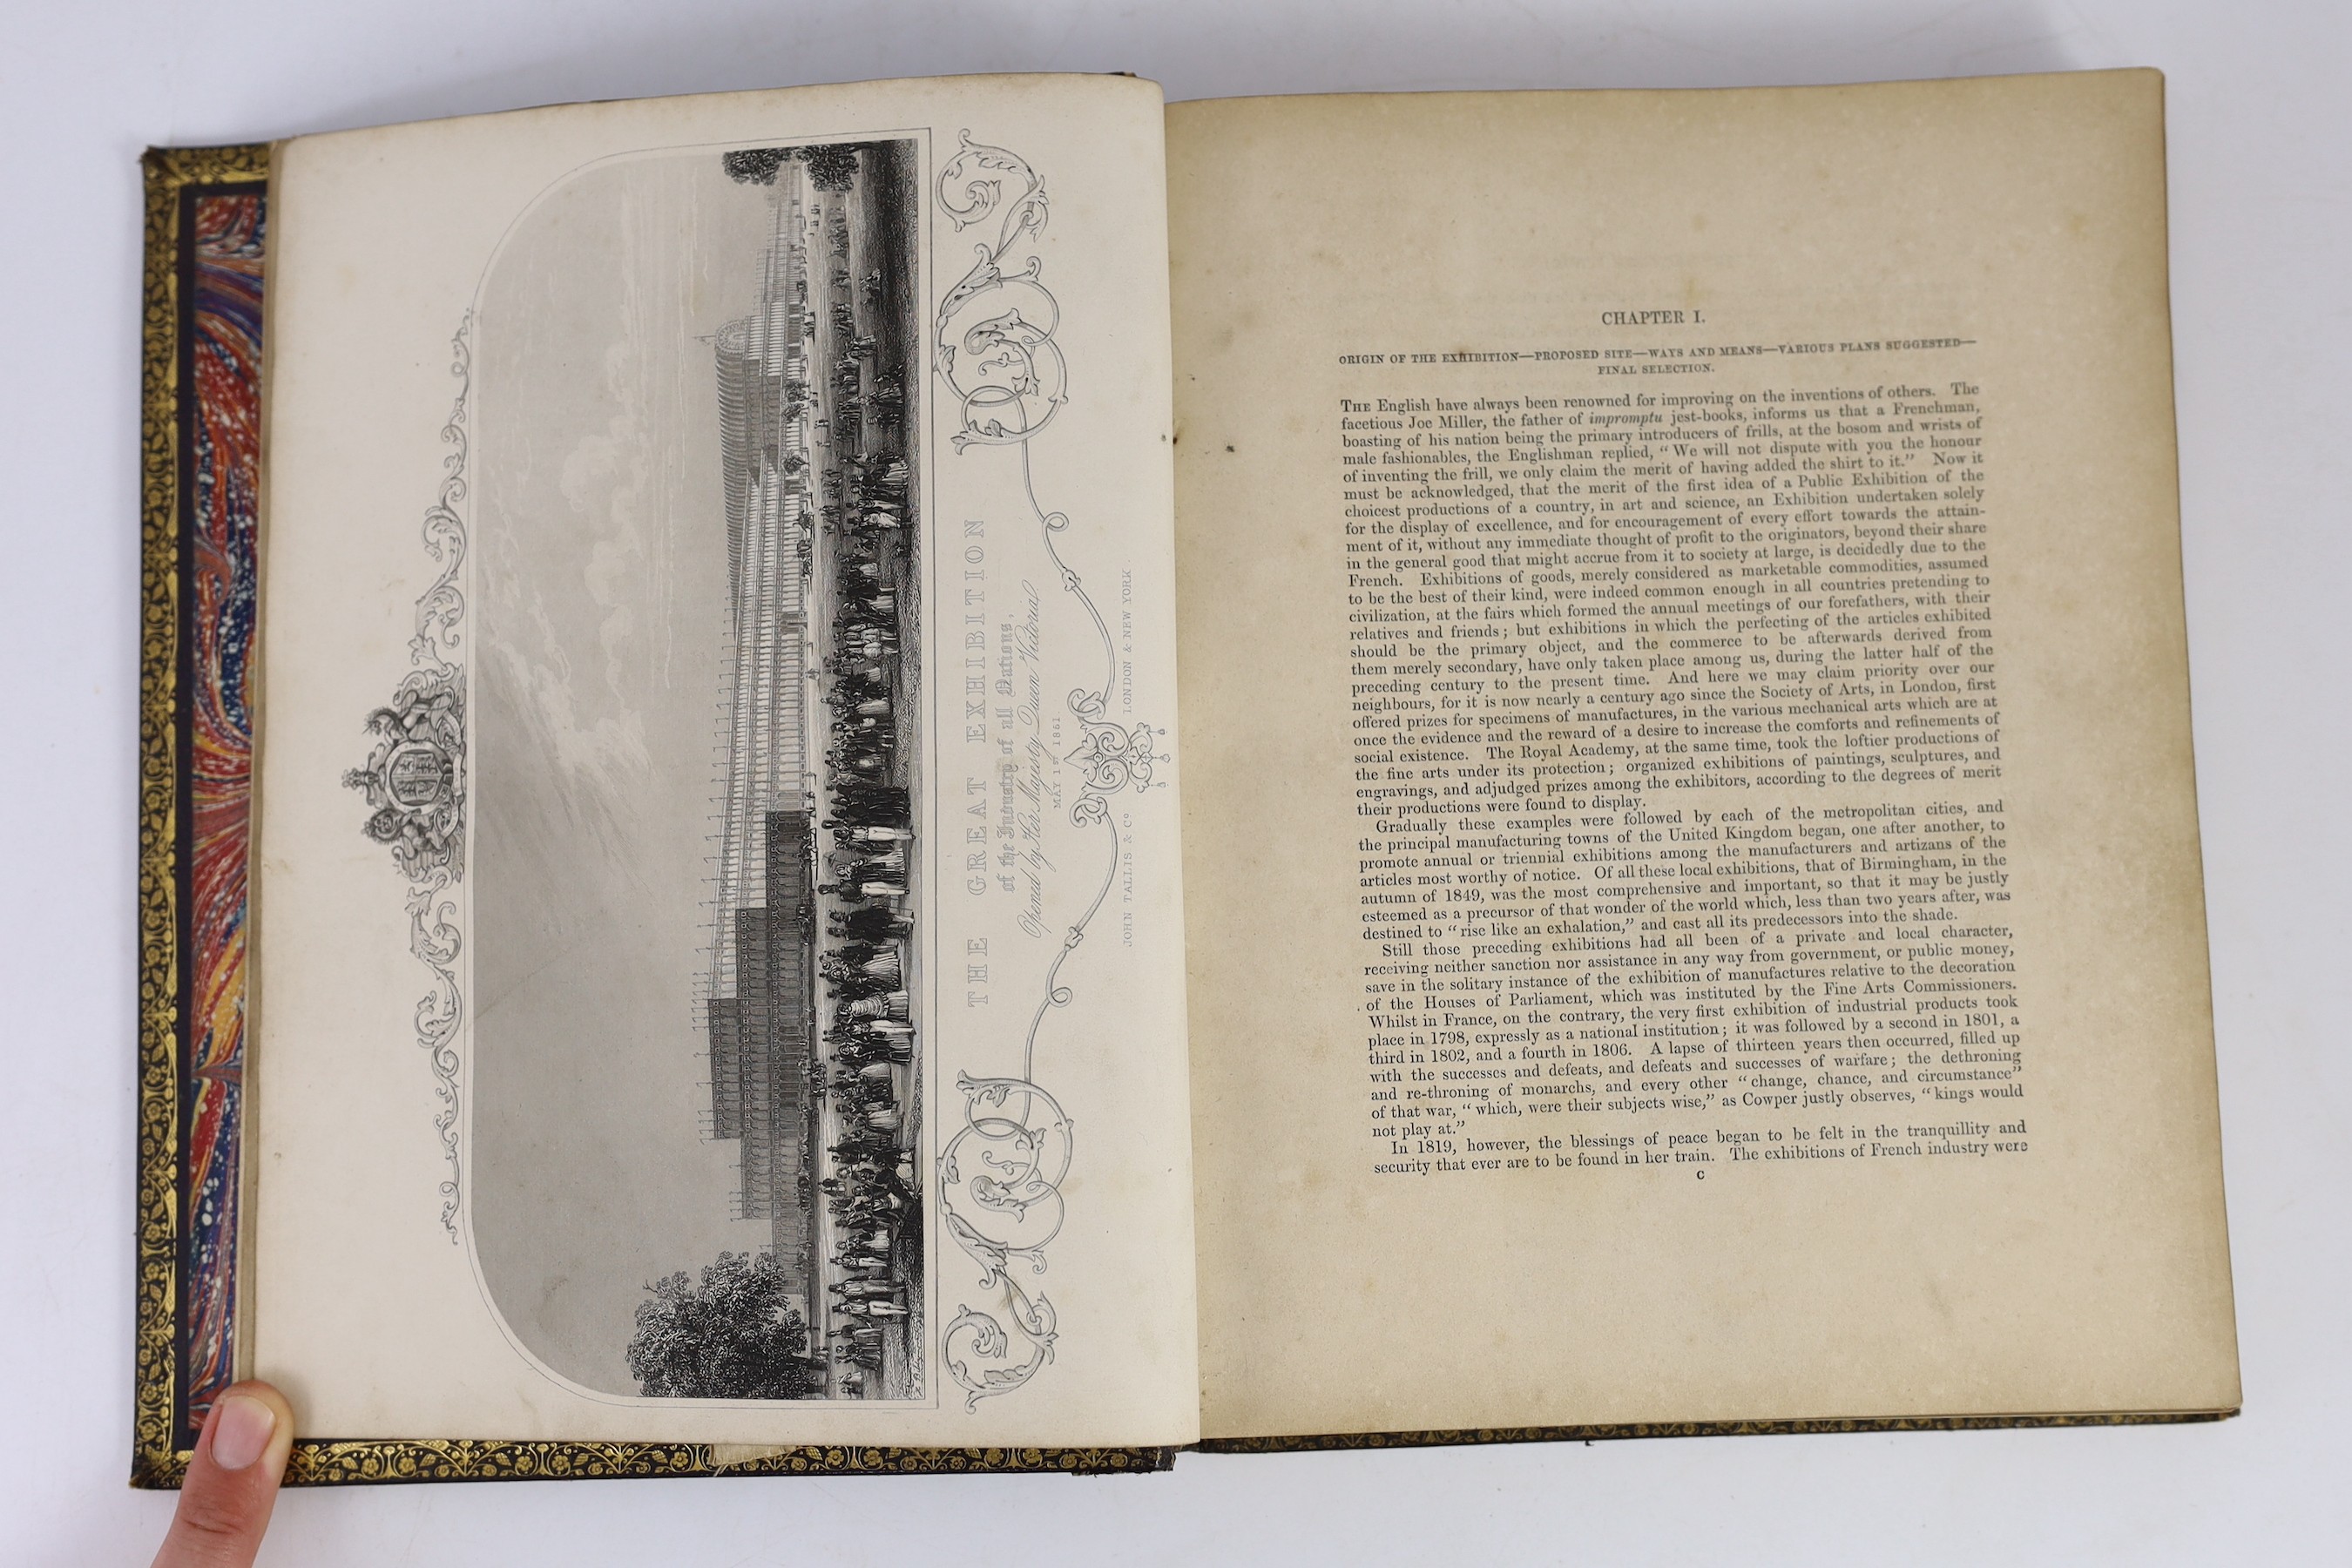 Tallis, John & Co. - History and Description of the Crystal Palace and the Exhibition of the World’s Industry in 1851, vol 1 only (of 3), 4to, diced calf gilt, with folding linen backed frontis - The Arms of all Nations,